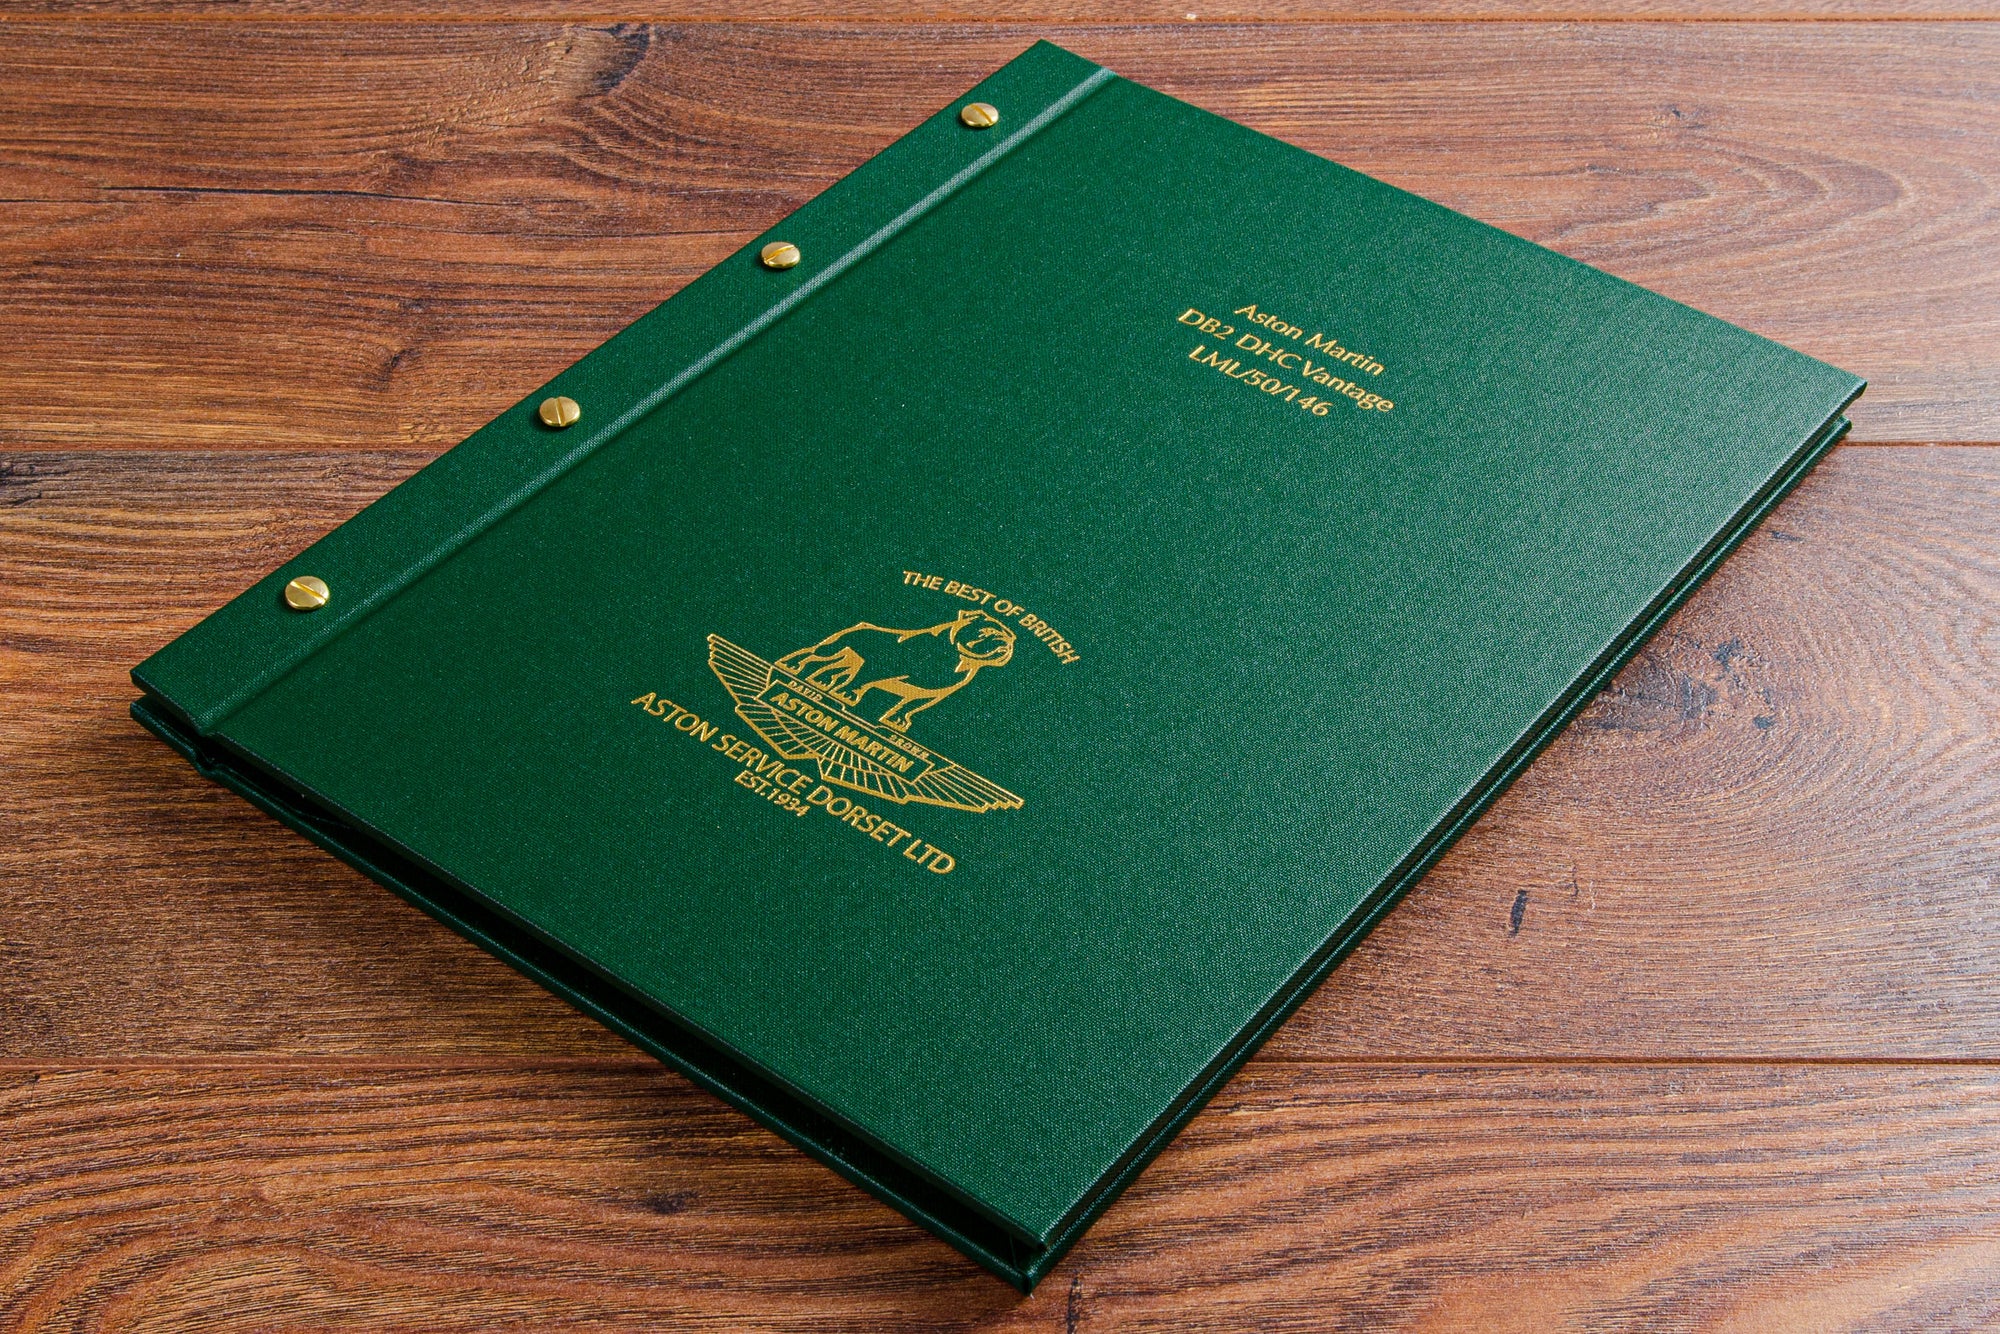 Gold embossed cover on green vehicle document binder